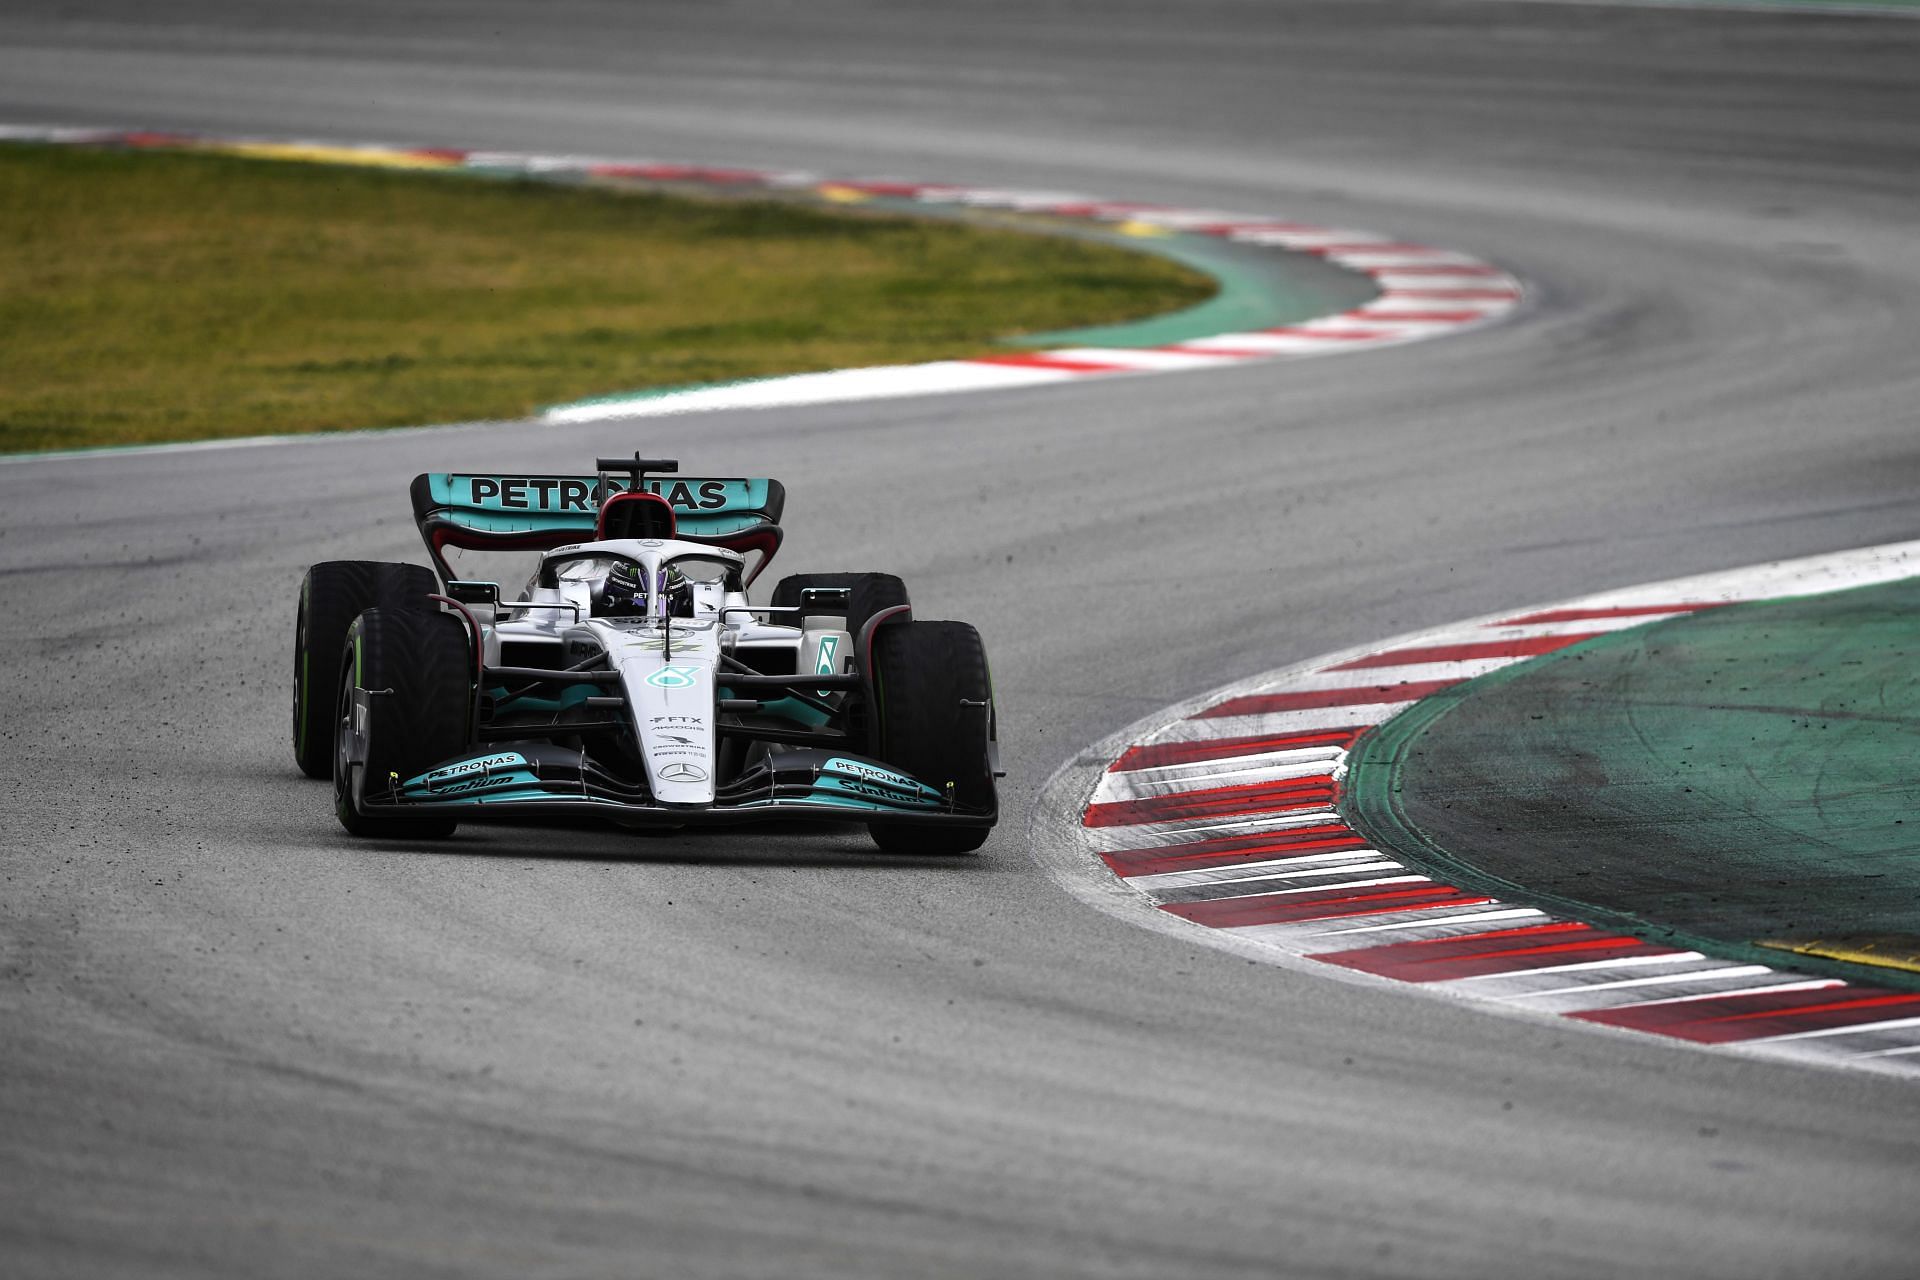 Lewis Hamilton driving the Mercedes W13 on track during Day 3 of F1 Testing at Circuit de Barcelona-Catalunya (Photo by Rudy Carezzevoli/Getty Images)